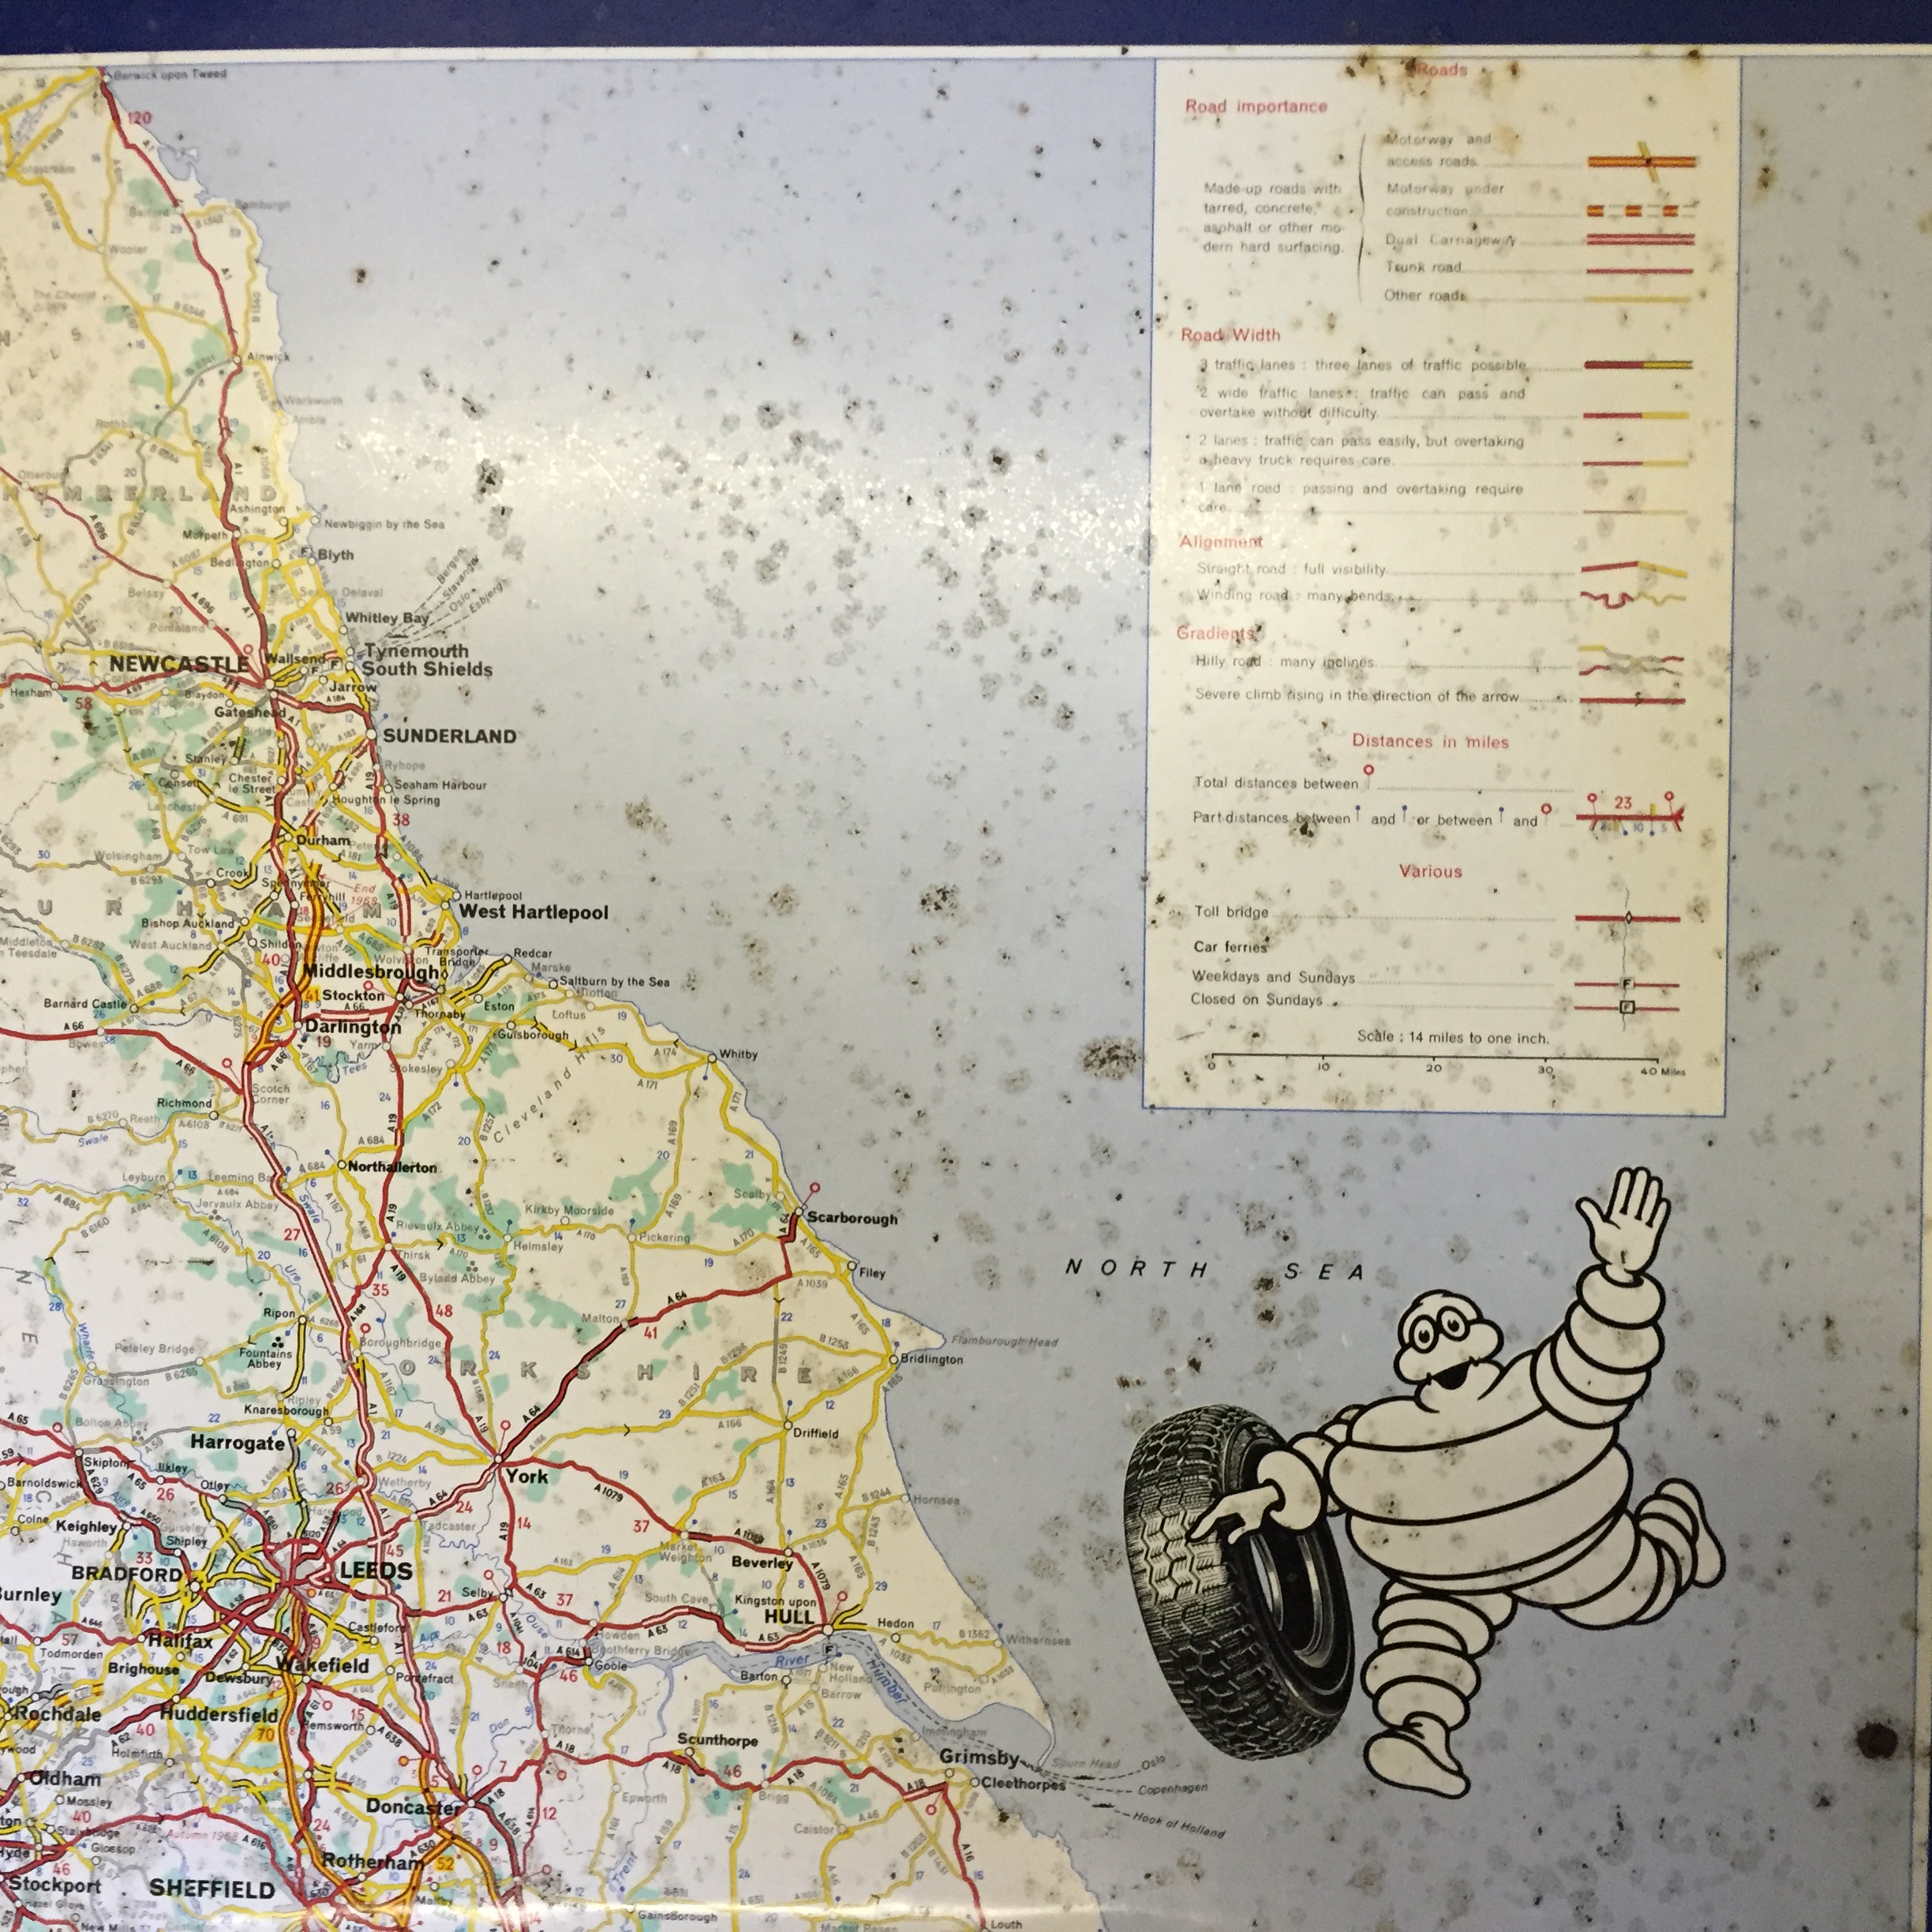 A 1968 Michelin road map. - Image 3 of 3